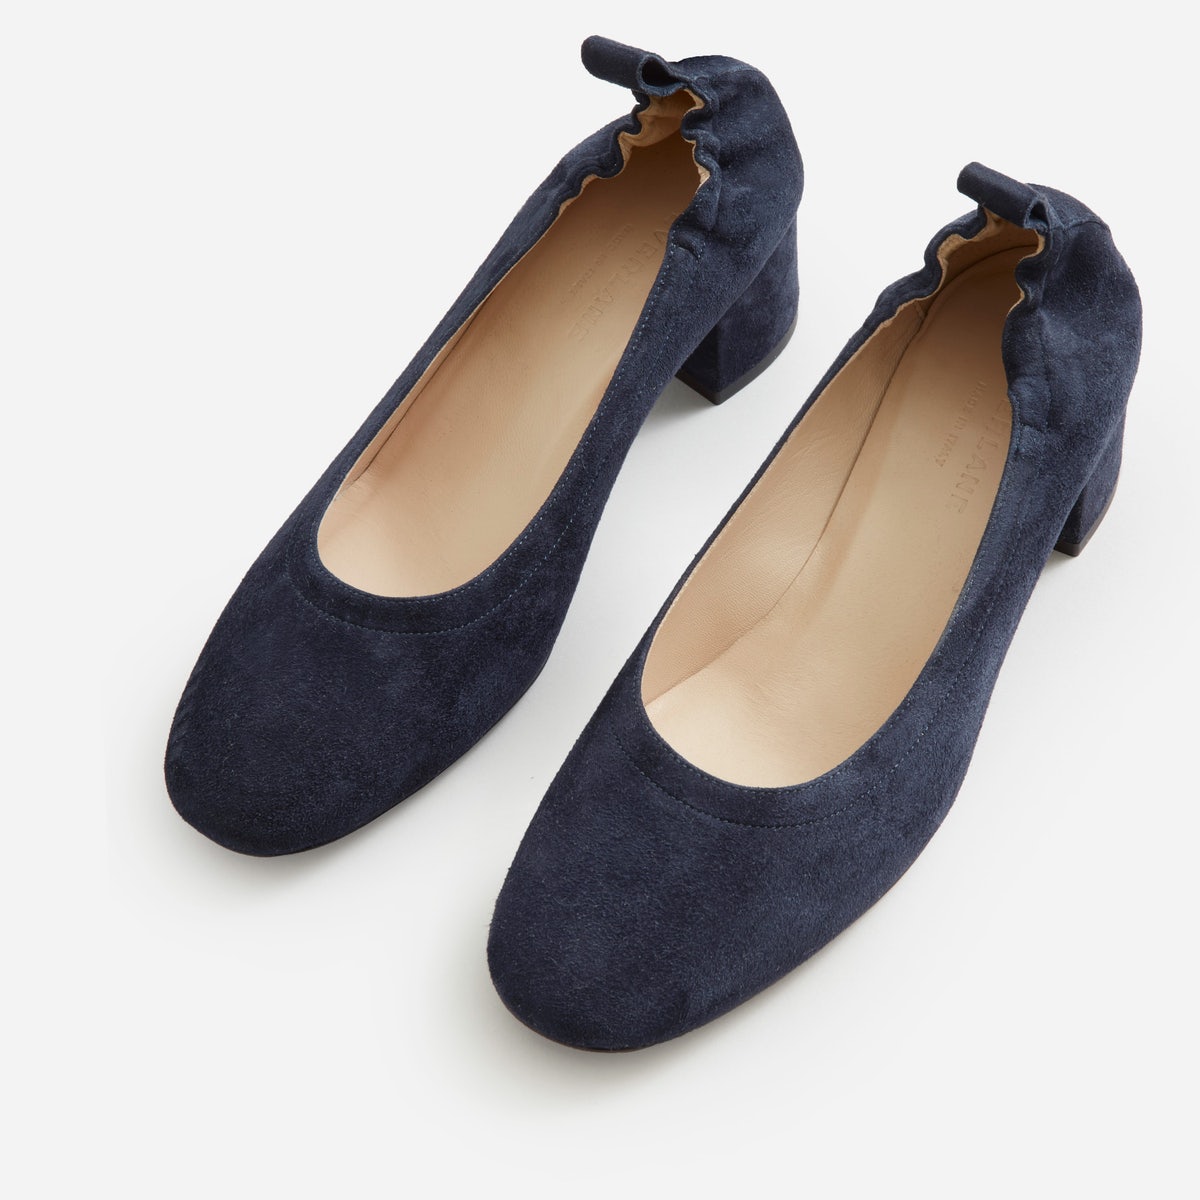 Everlane day heel, as seen from above. It has a rounded toe and elastic back.